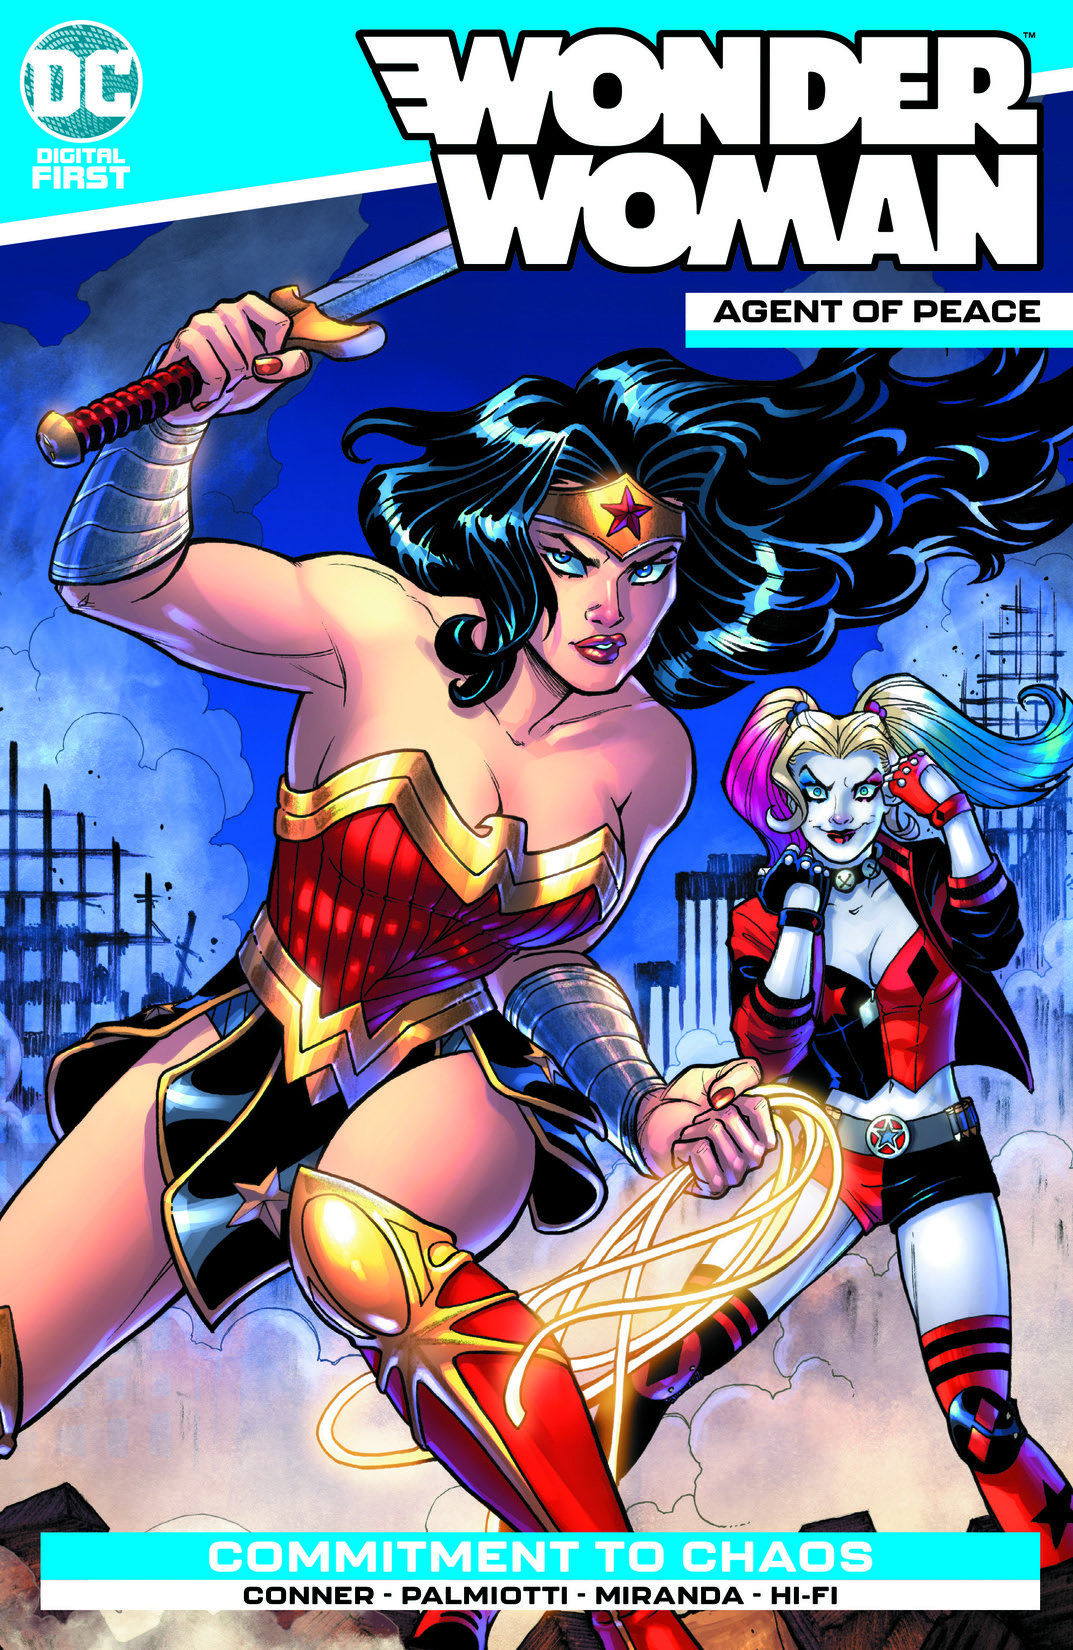 Wonder Woman: Agent of Peace #1 preview images